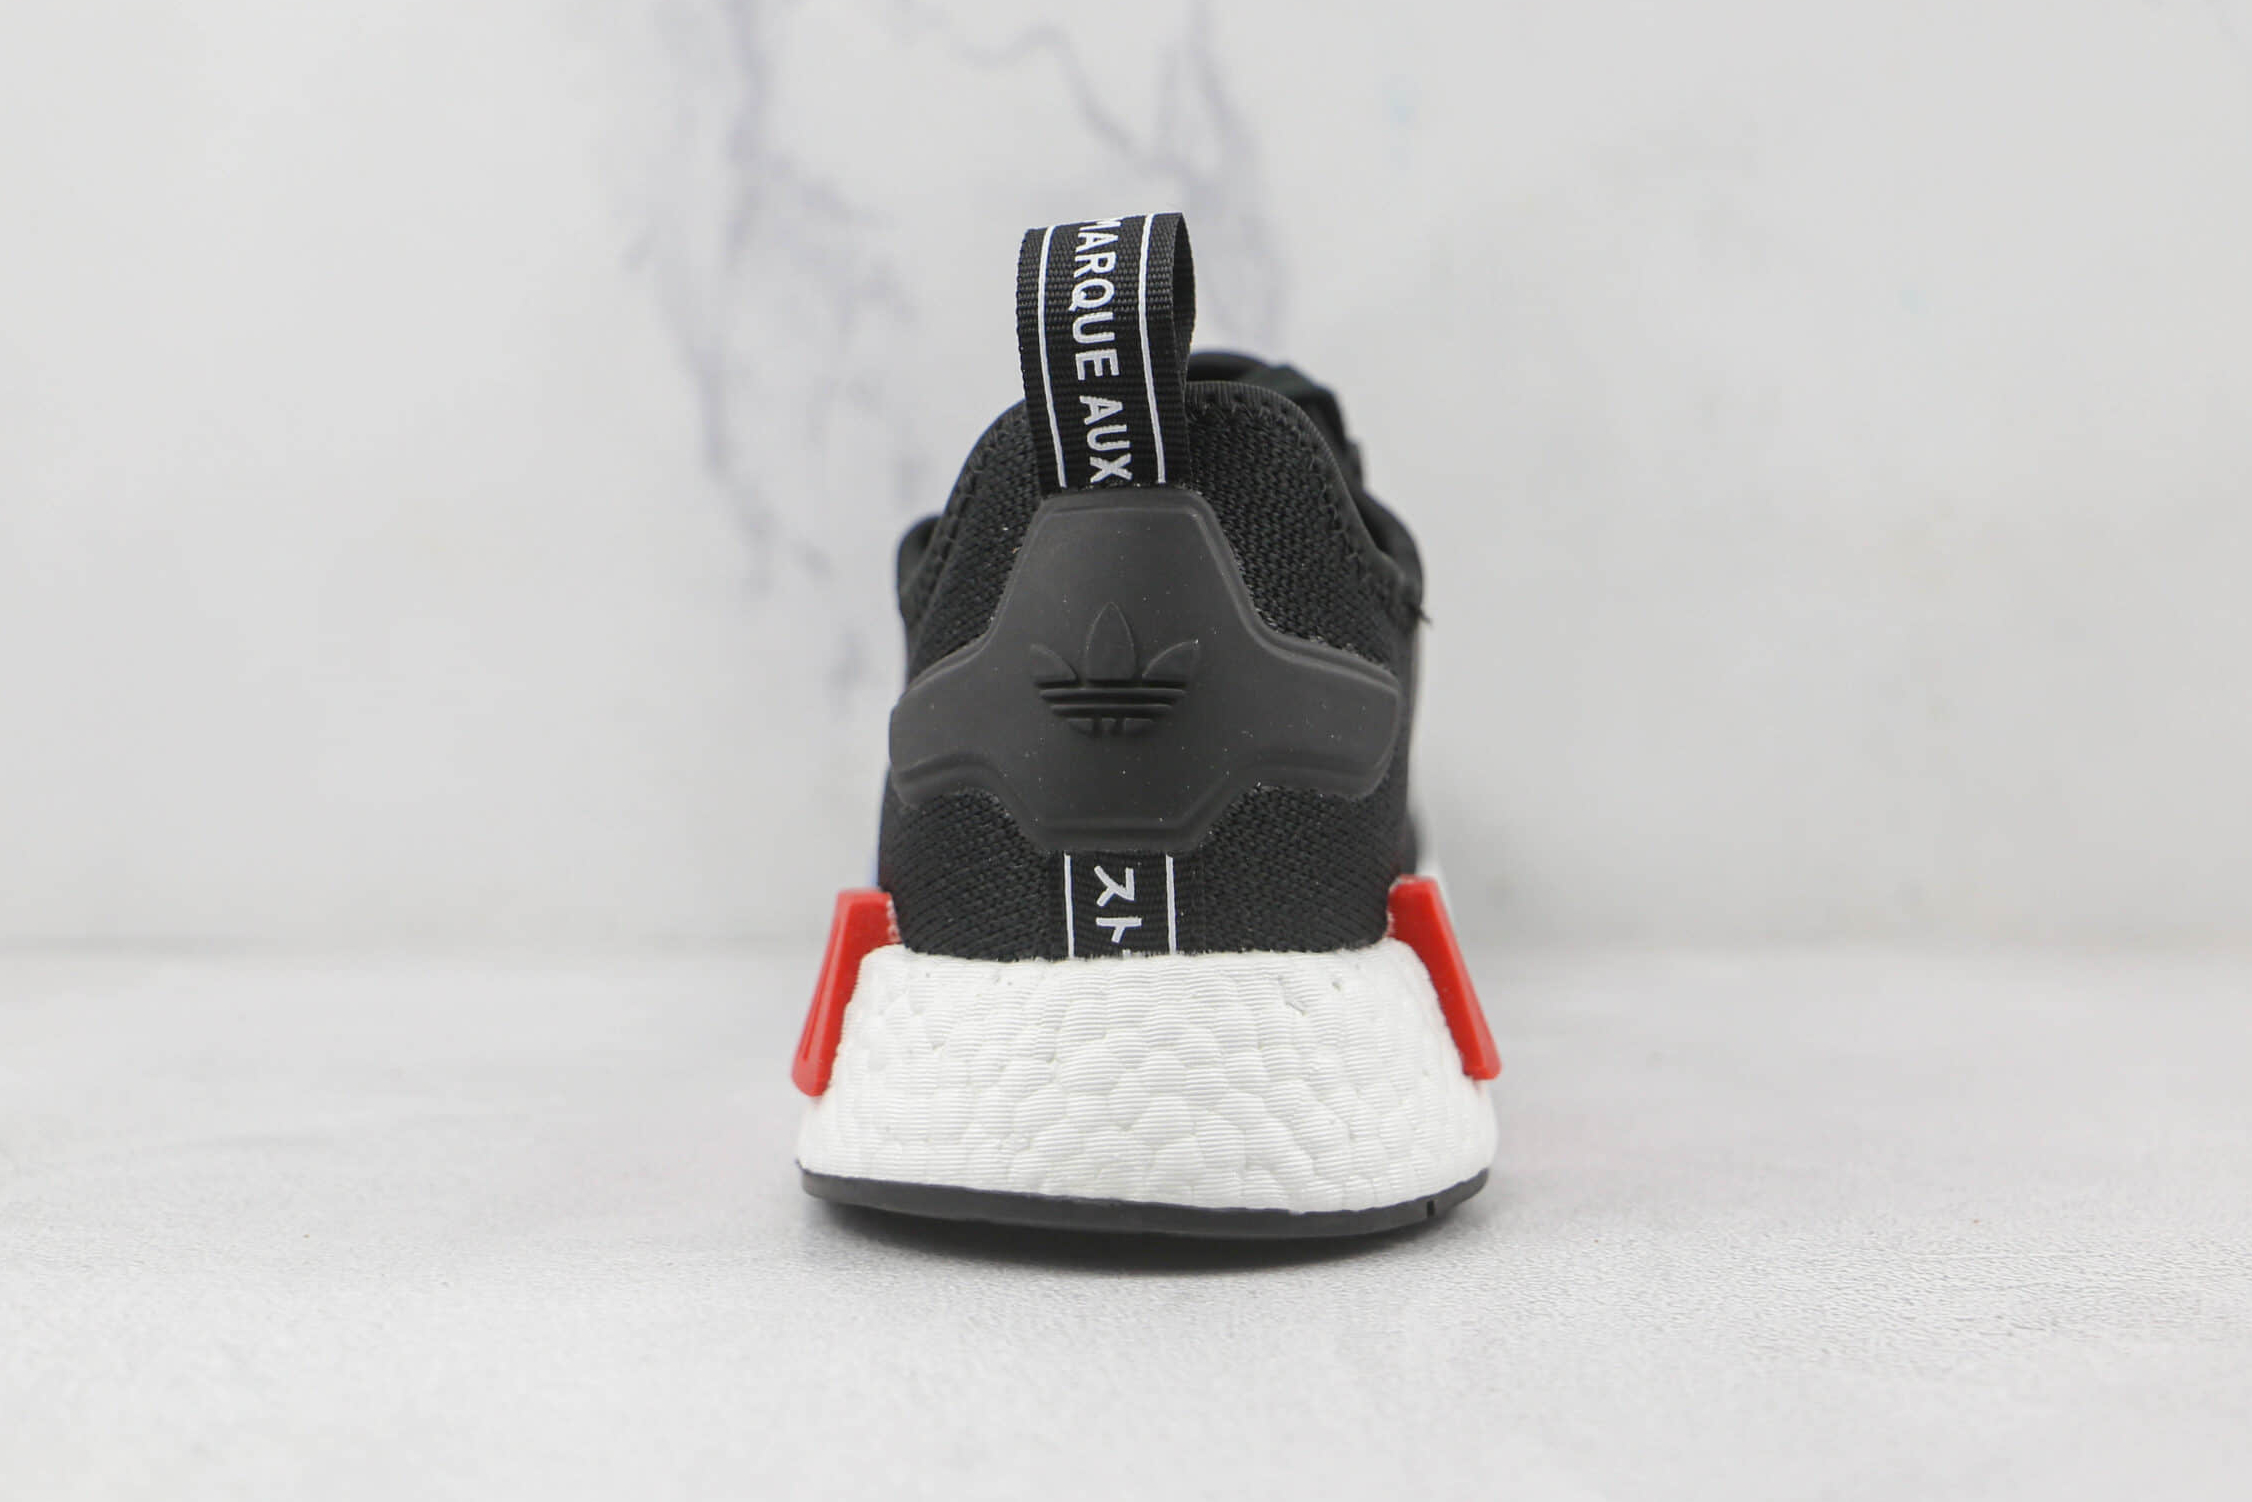 Adidas NMD_R1 'Black OG' GZ7922 - Premium Sneakers for Urban Style | Limited Stock.